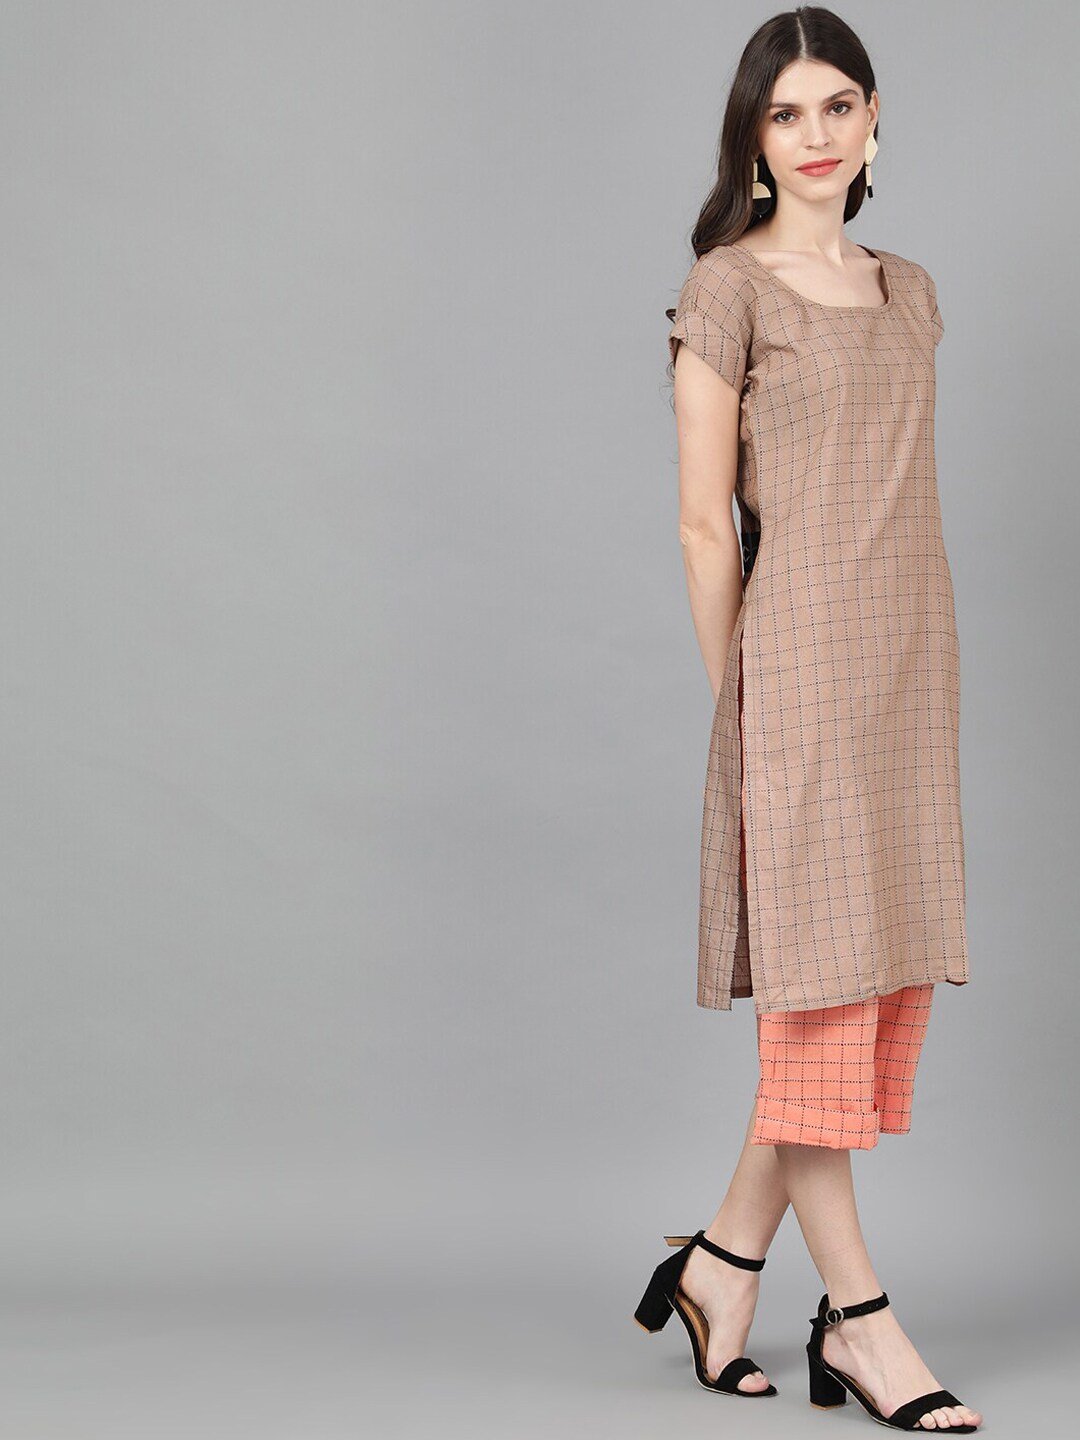 Women's  Brown & Peach-Coloured Embroidered Kurta with Trousers - AKS